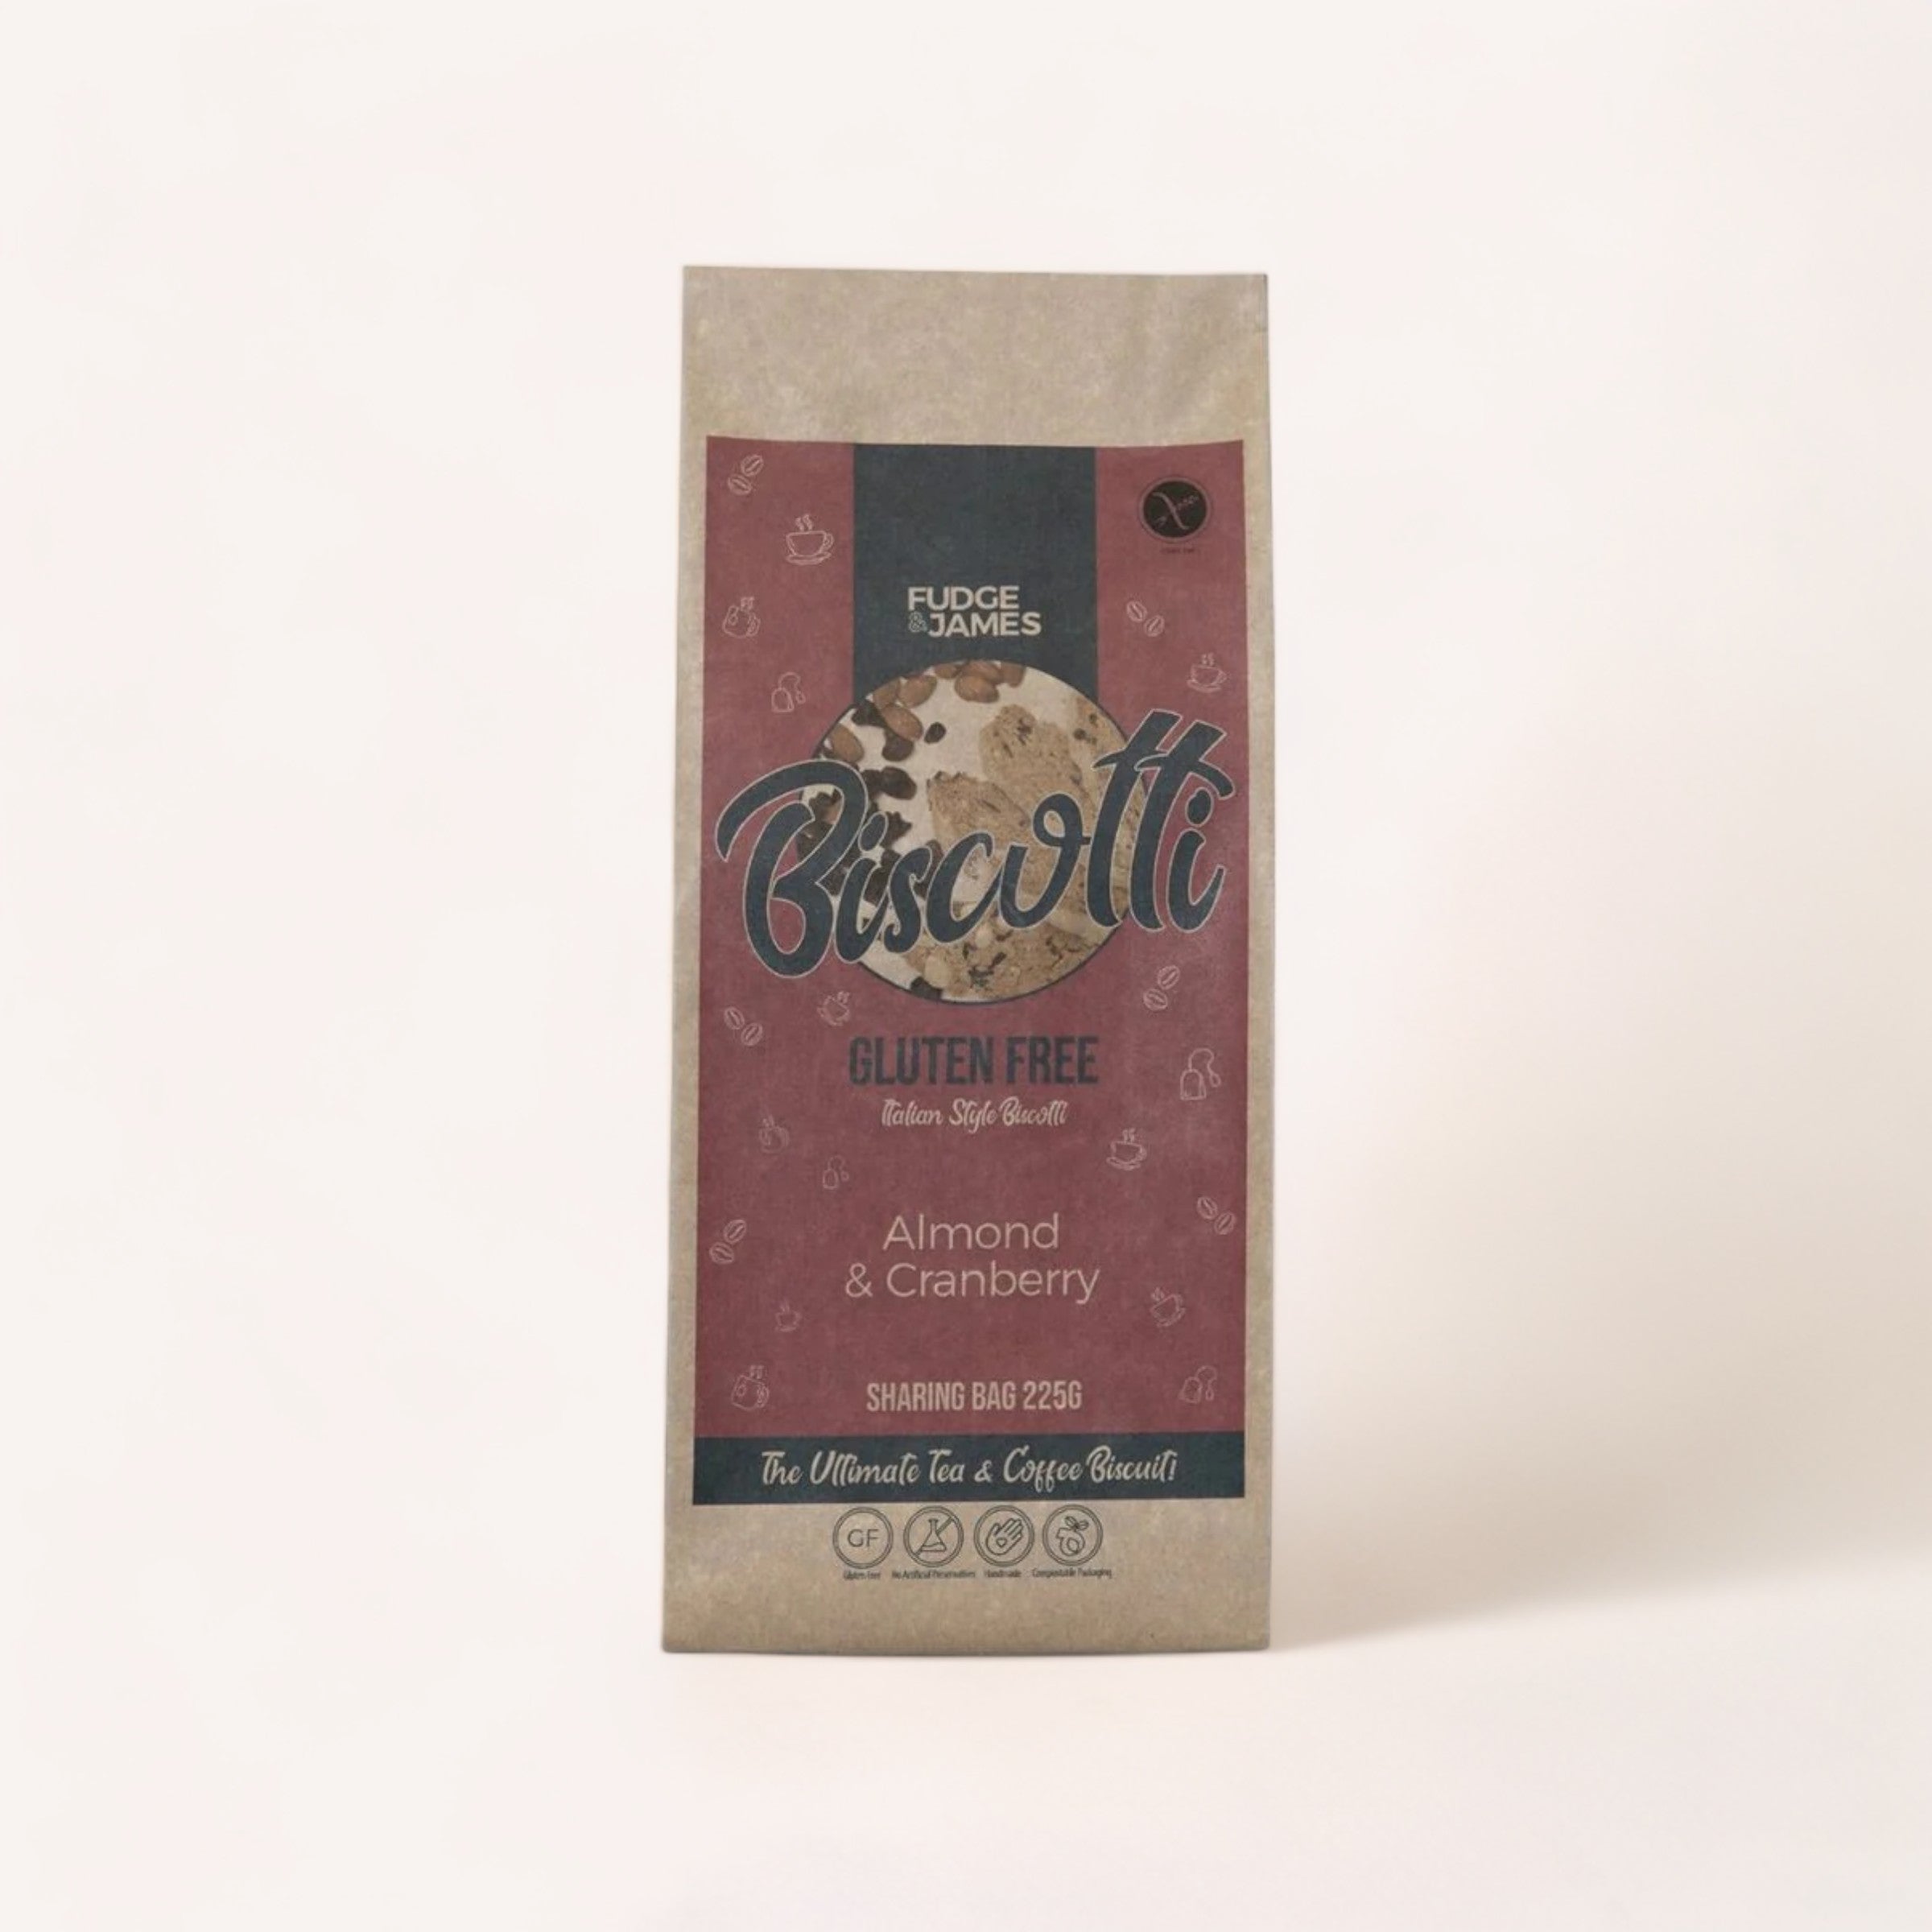 A pack of gluten-free biscotti with almond and cranberry flavor, presented in a sophisticated brown package, ideal for pairing with giftbox co. Coffee, Anyone?.